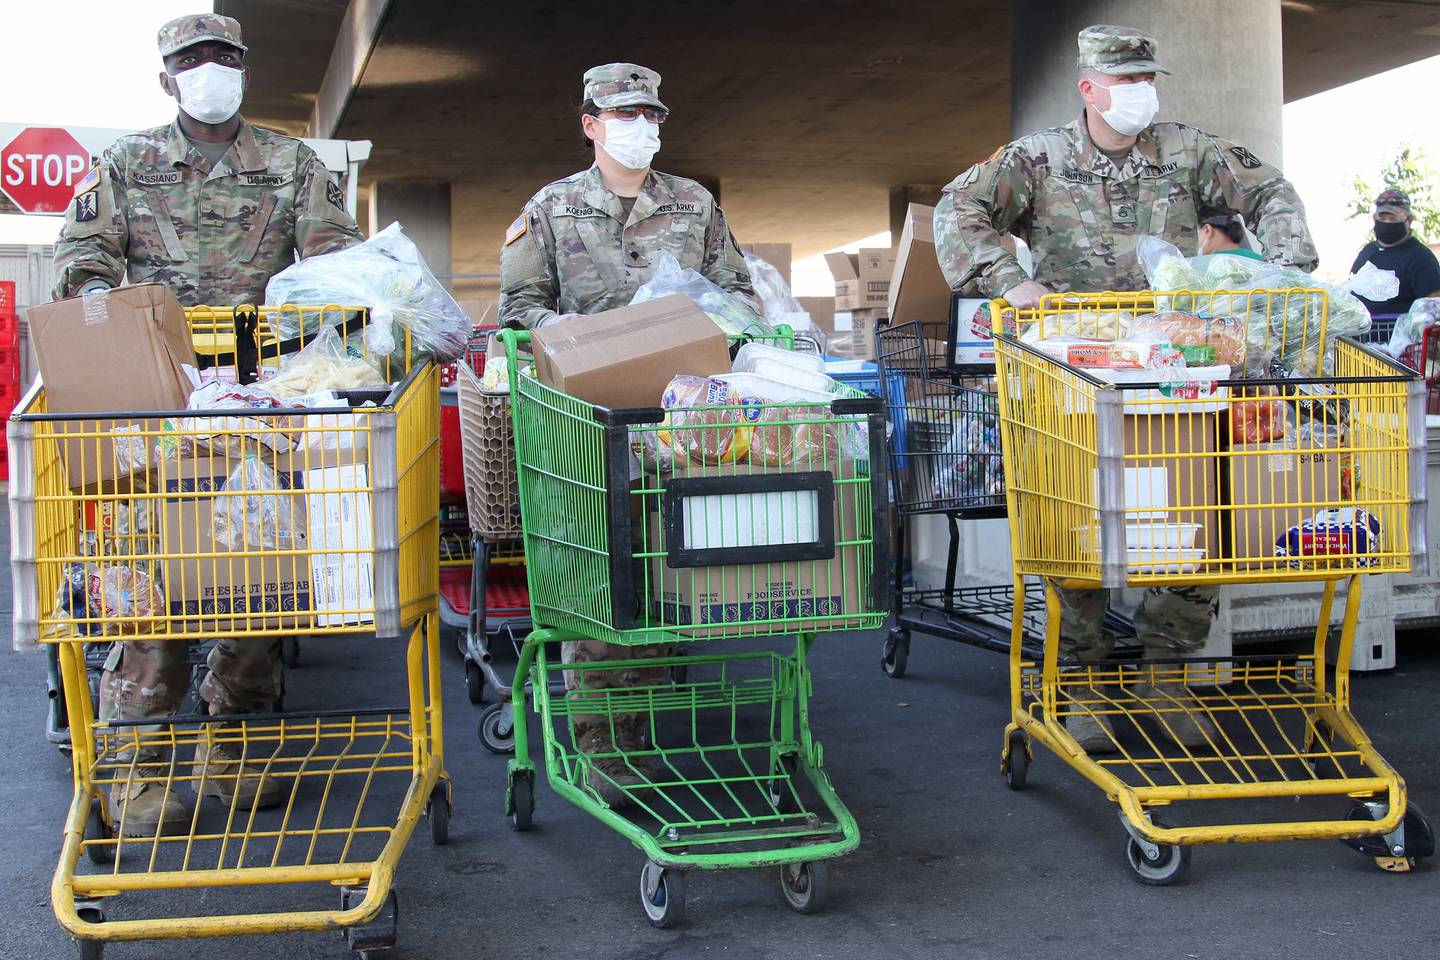 Soldiers with the California National Guard move grocery carts filled with food and await the arrival of recipients on June 26, 2020, at the Stockton/San Joaquin Emergency Food Bank in Stockton, Calif.